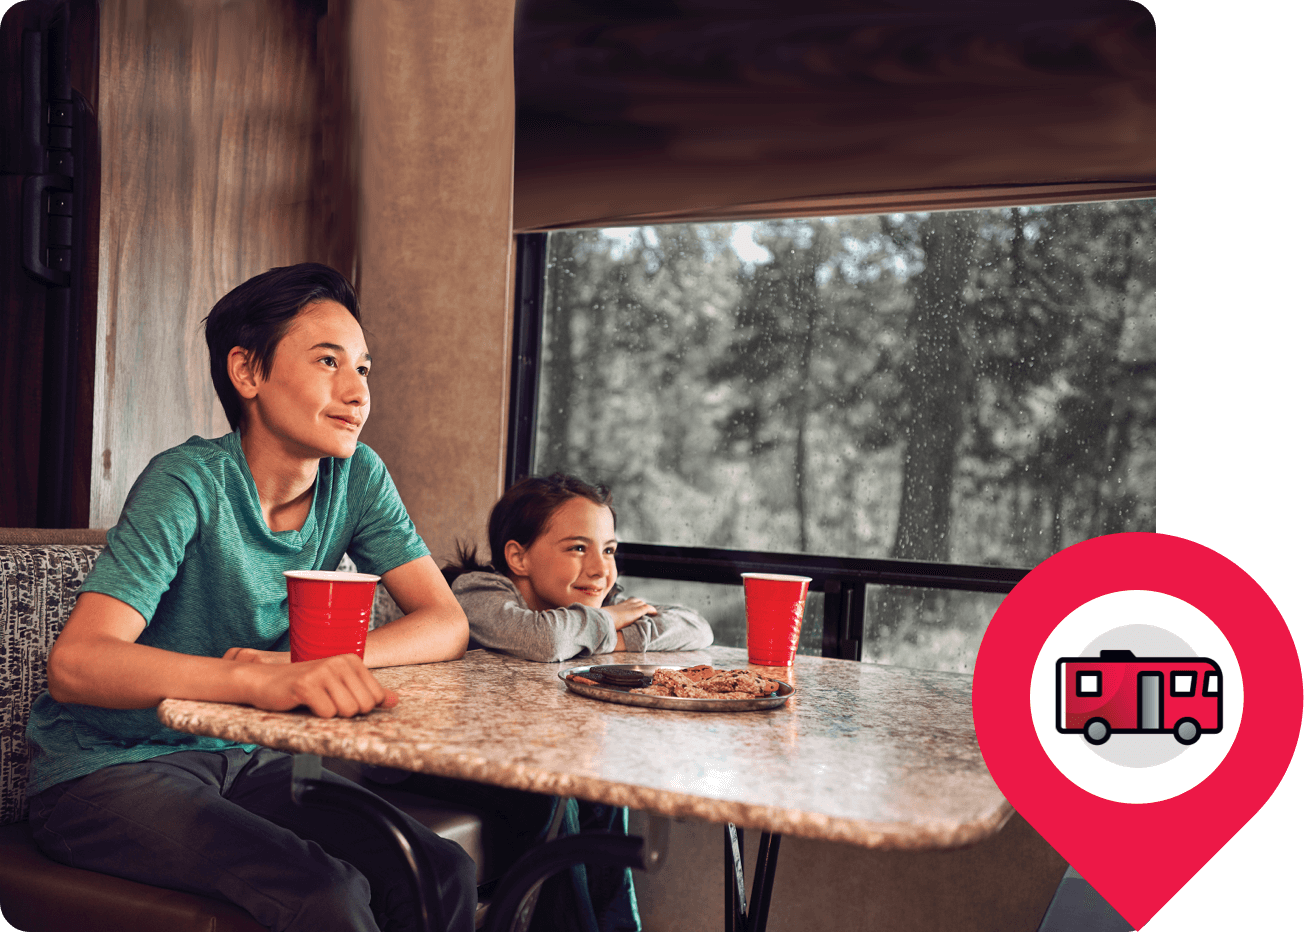 Kids sitting at table in an RV watching television.